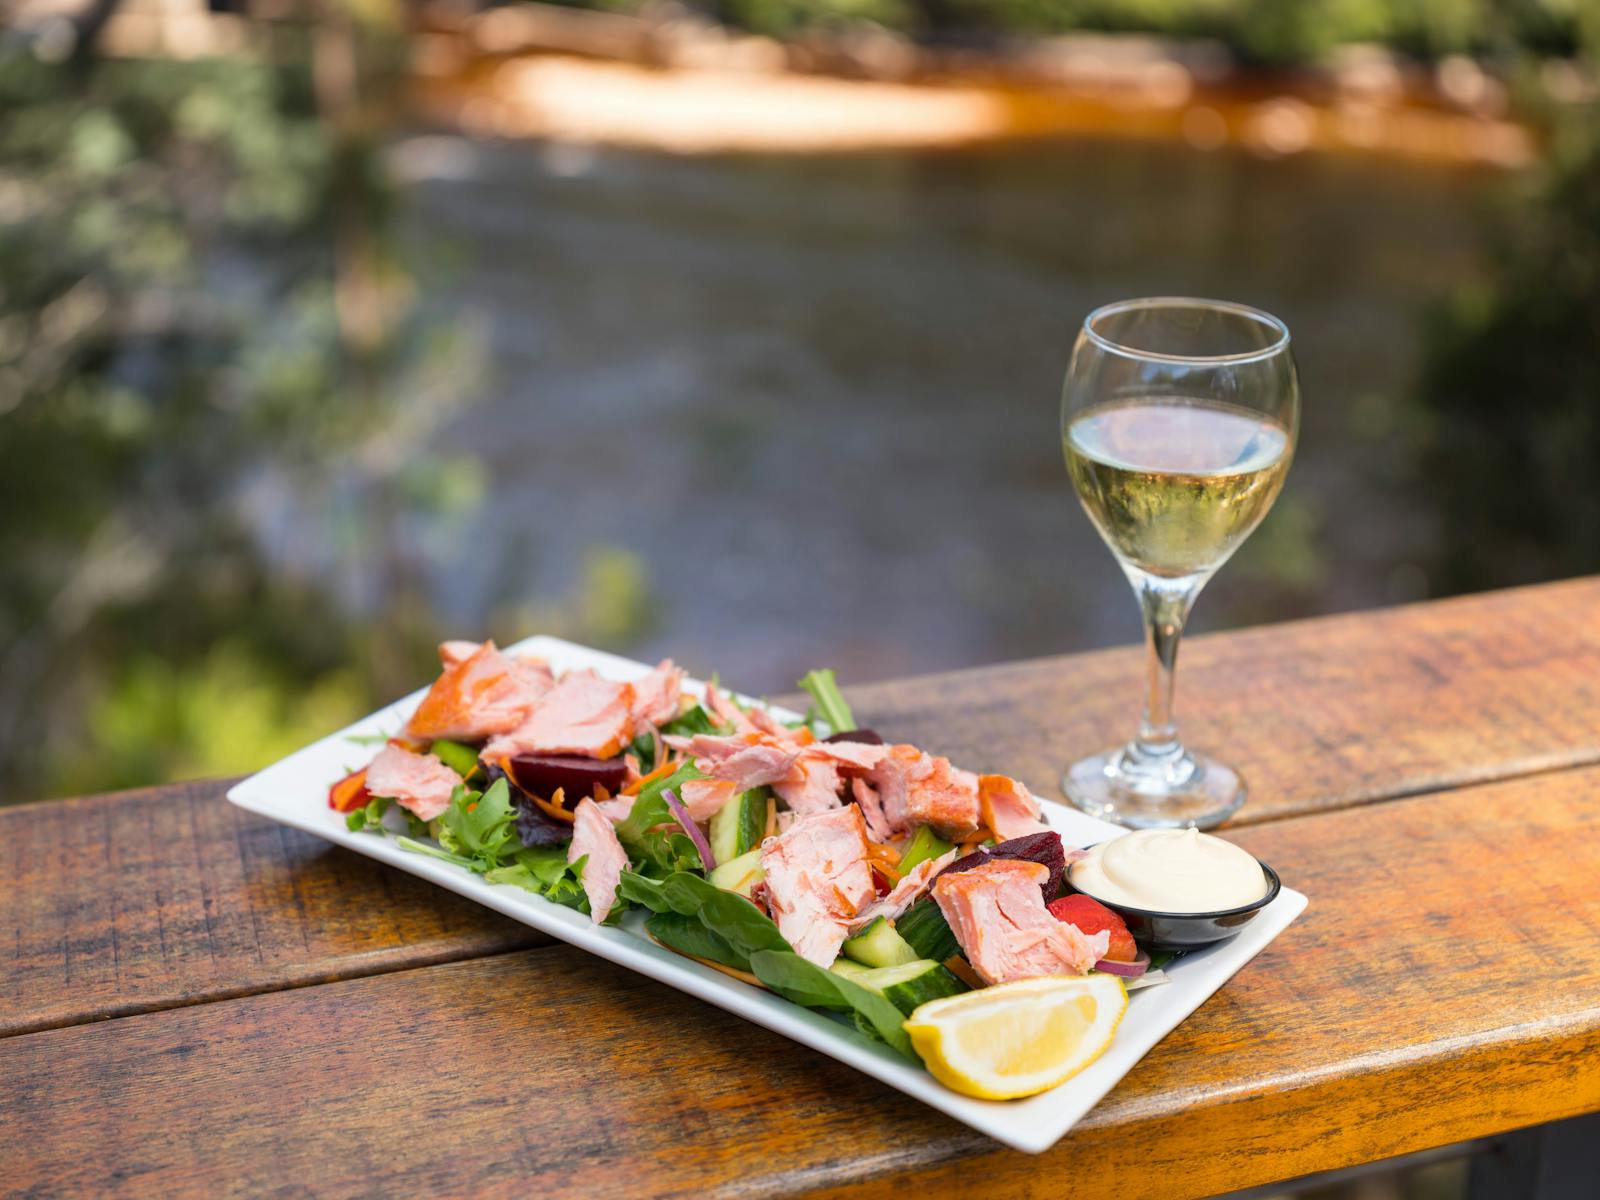 A plate of salmon over salad and glass of wine on bench, overlooking river